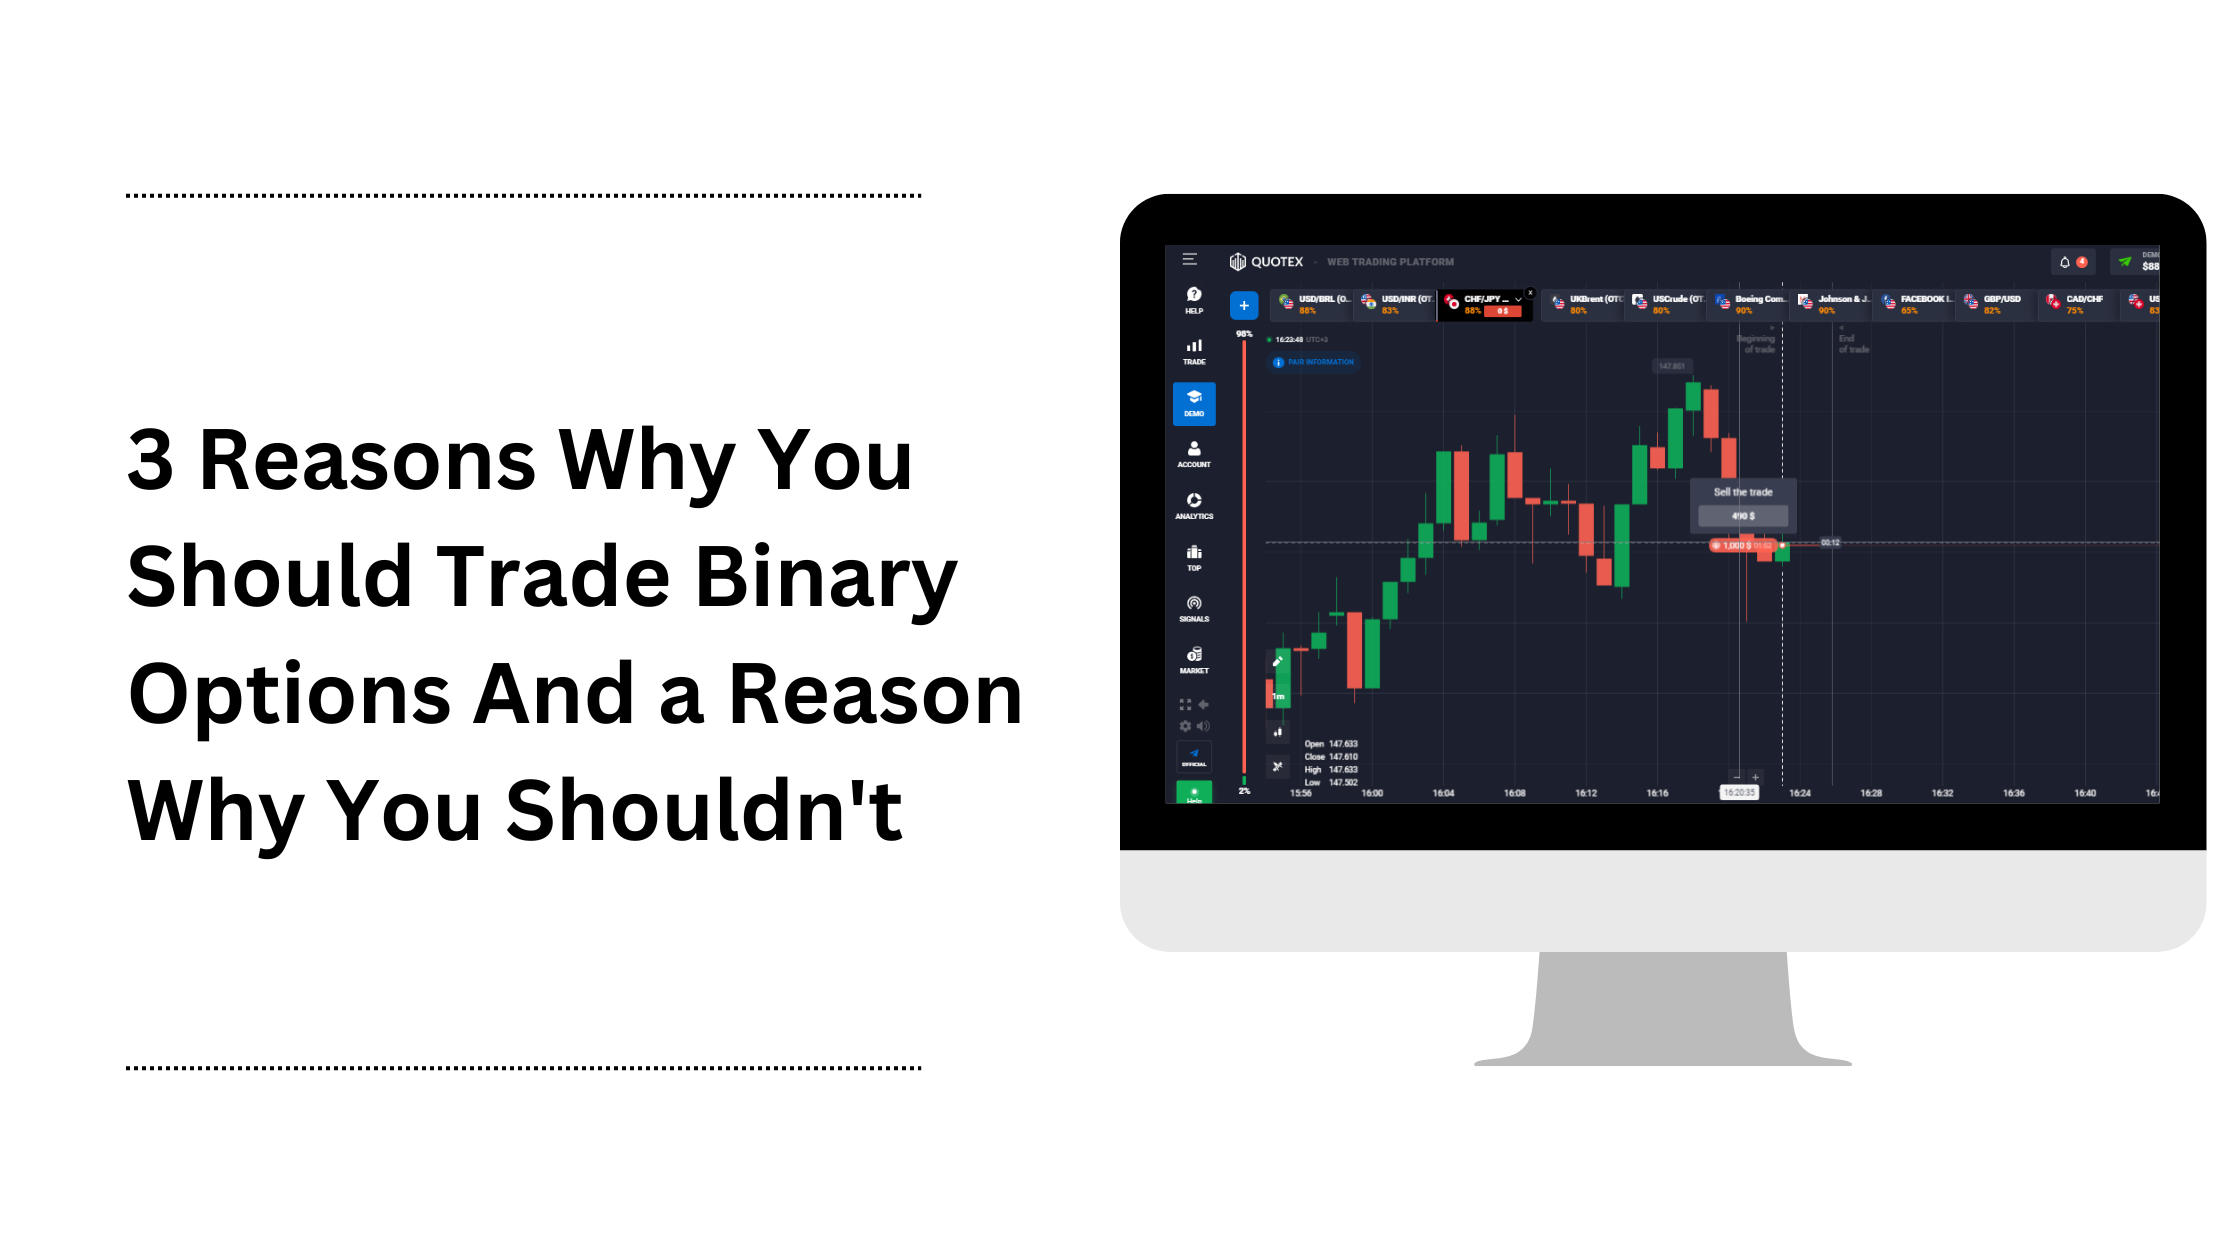 Reasons why you should trade binary options